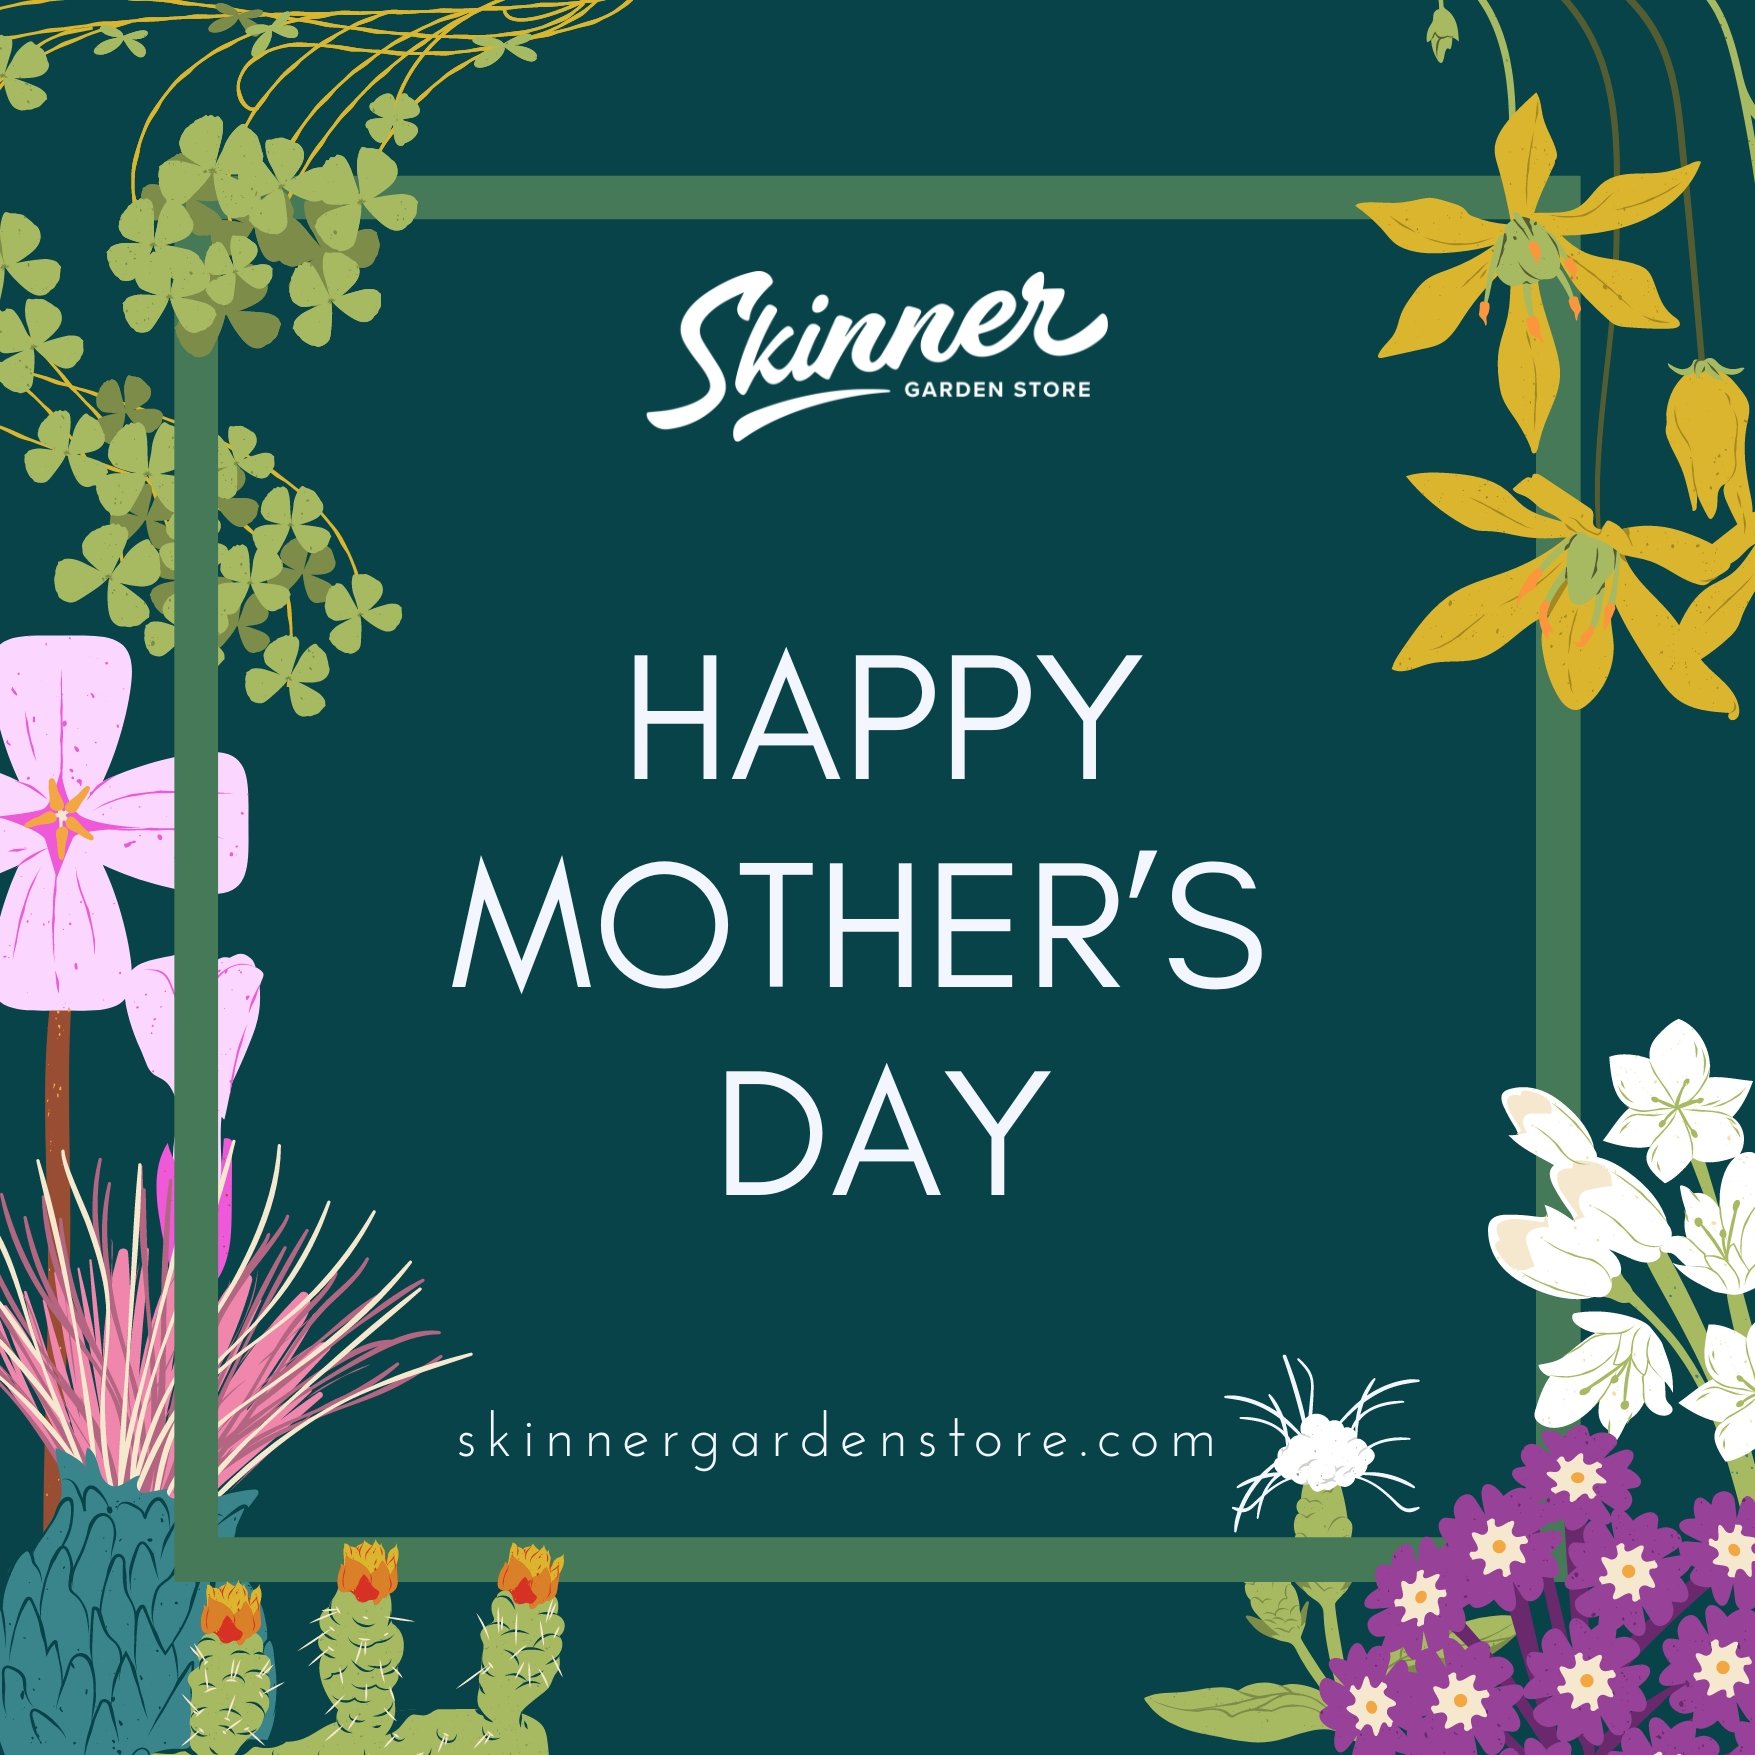 To all the moms!